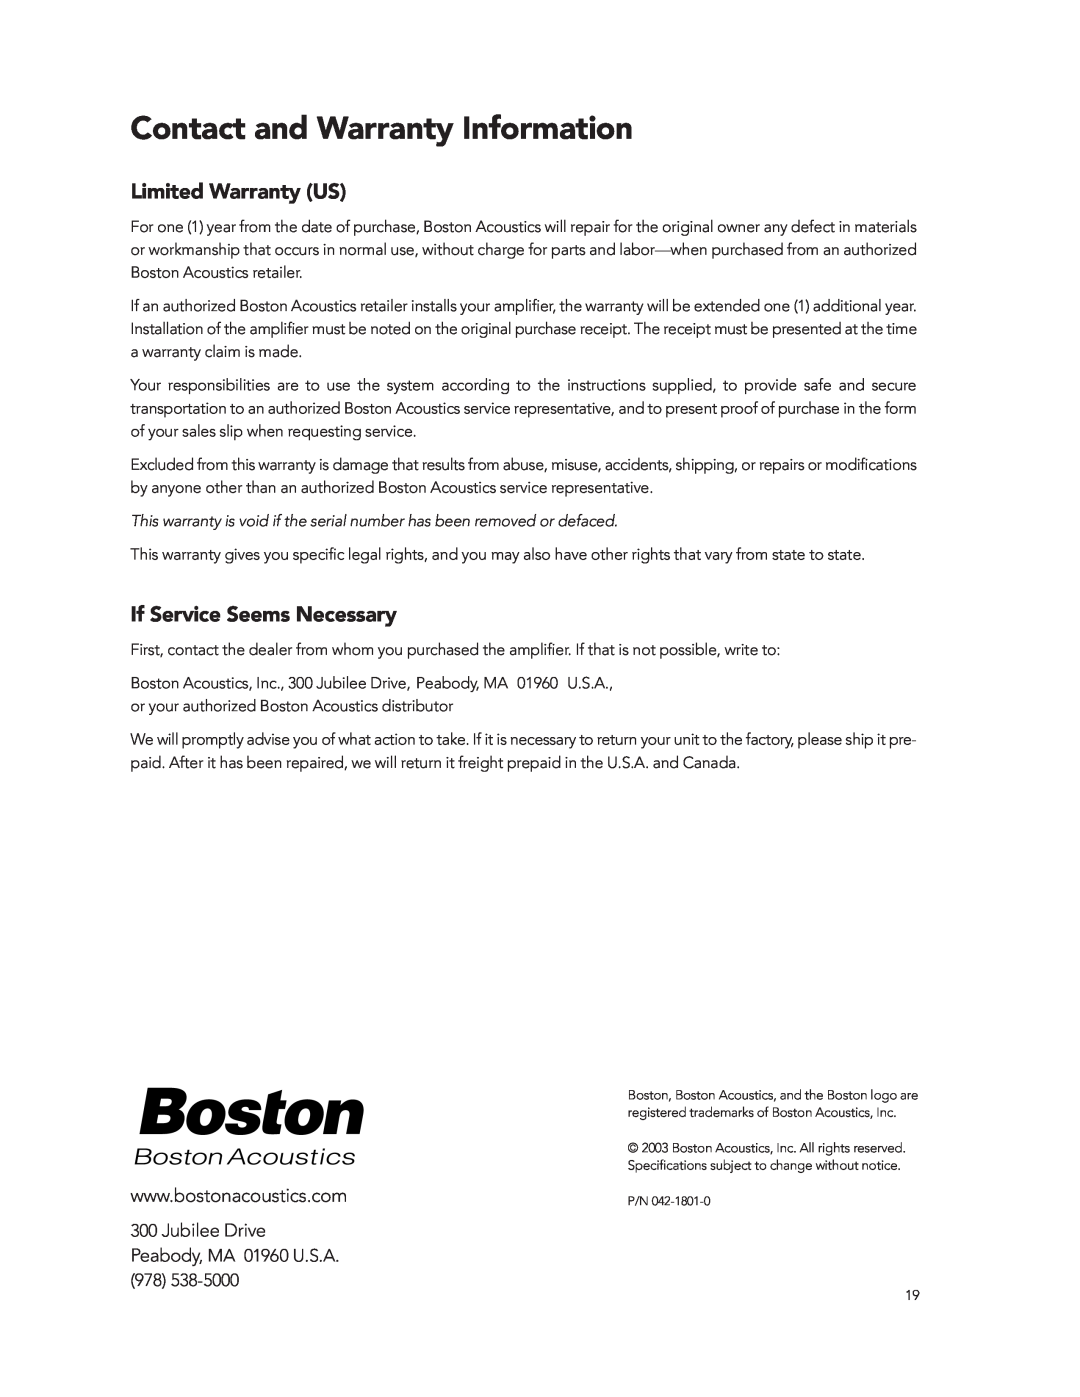 Boston Acoustics GT-28, GT-24 manual Contact and Warranty Information, Limited Warranty US, If Service Seems Necessary 